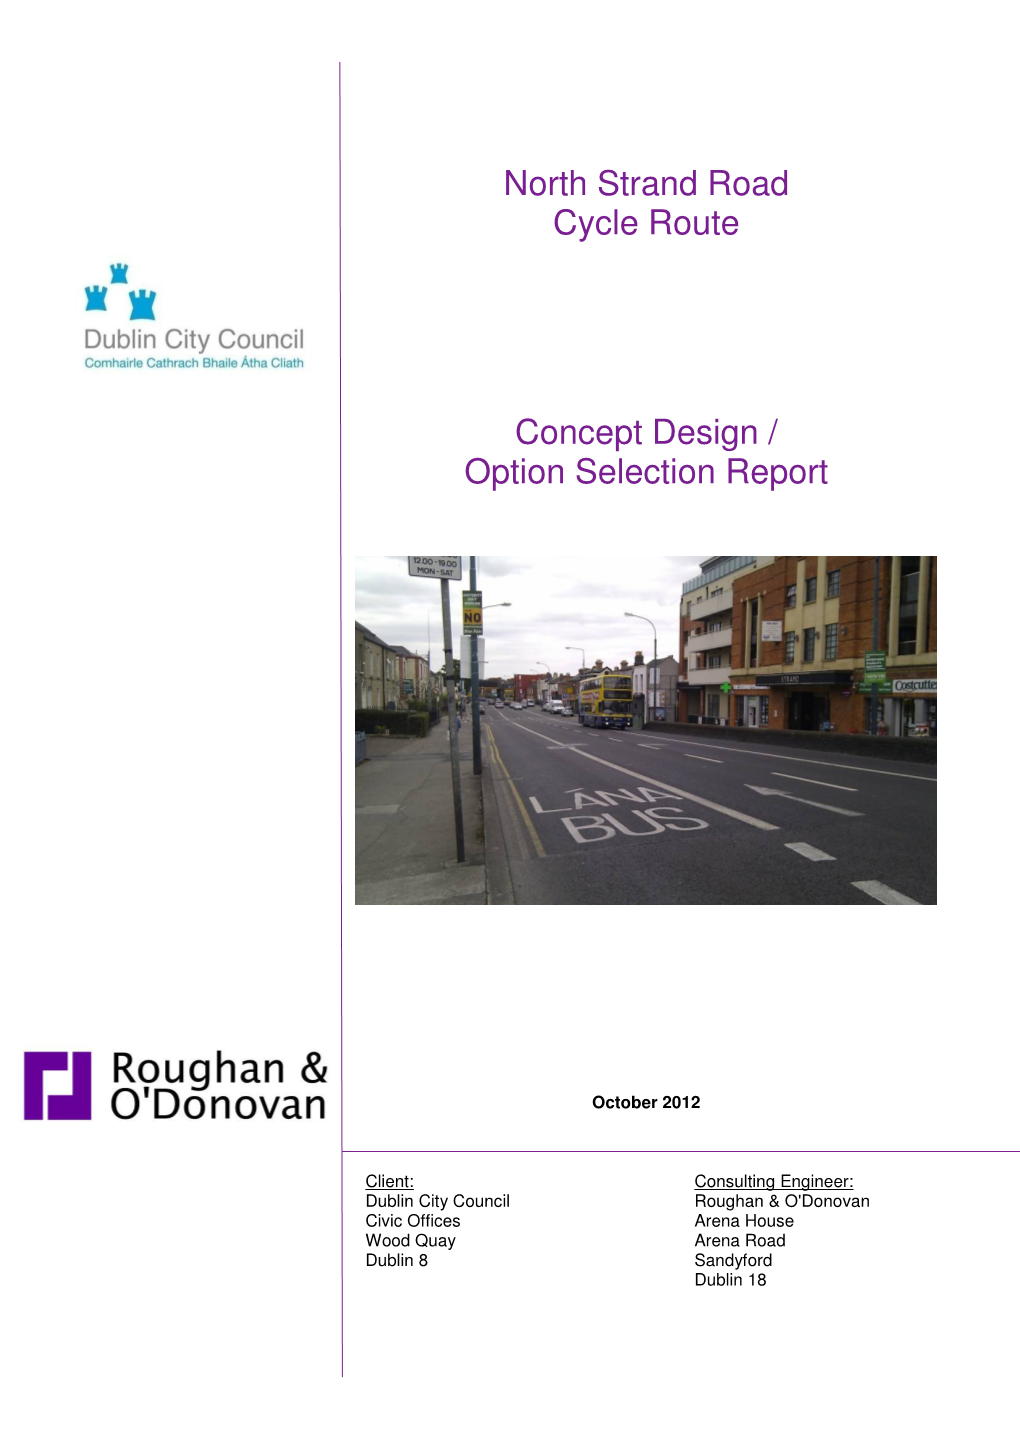 North Strand Road Cycle Route Concept Design / Option Selection